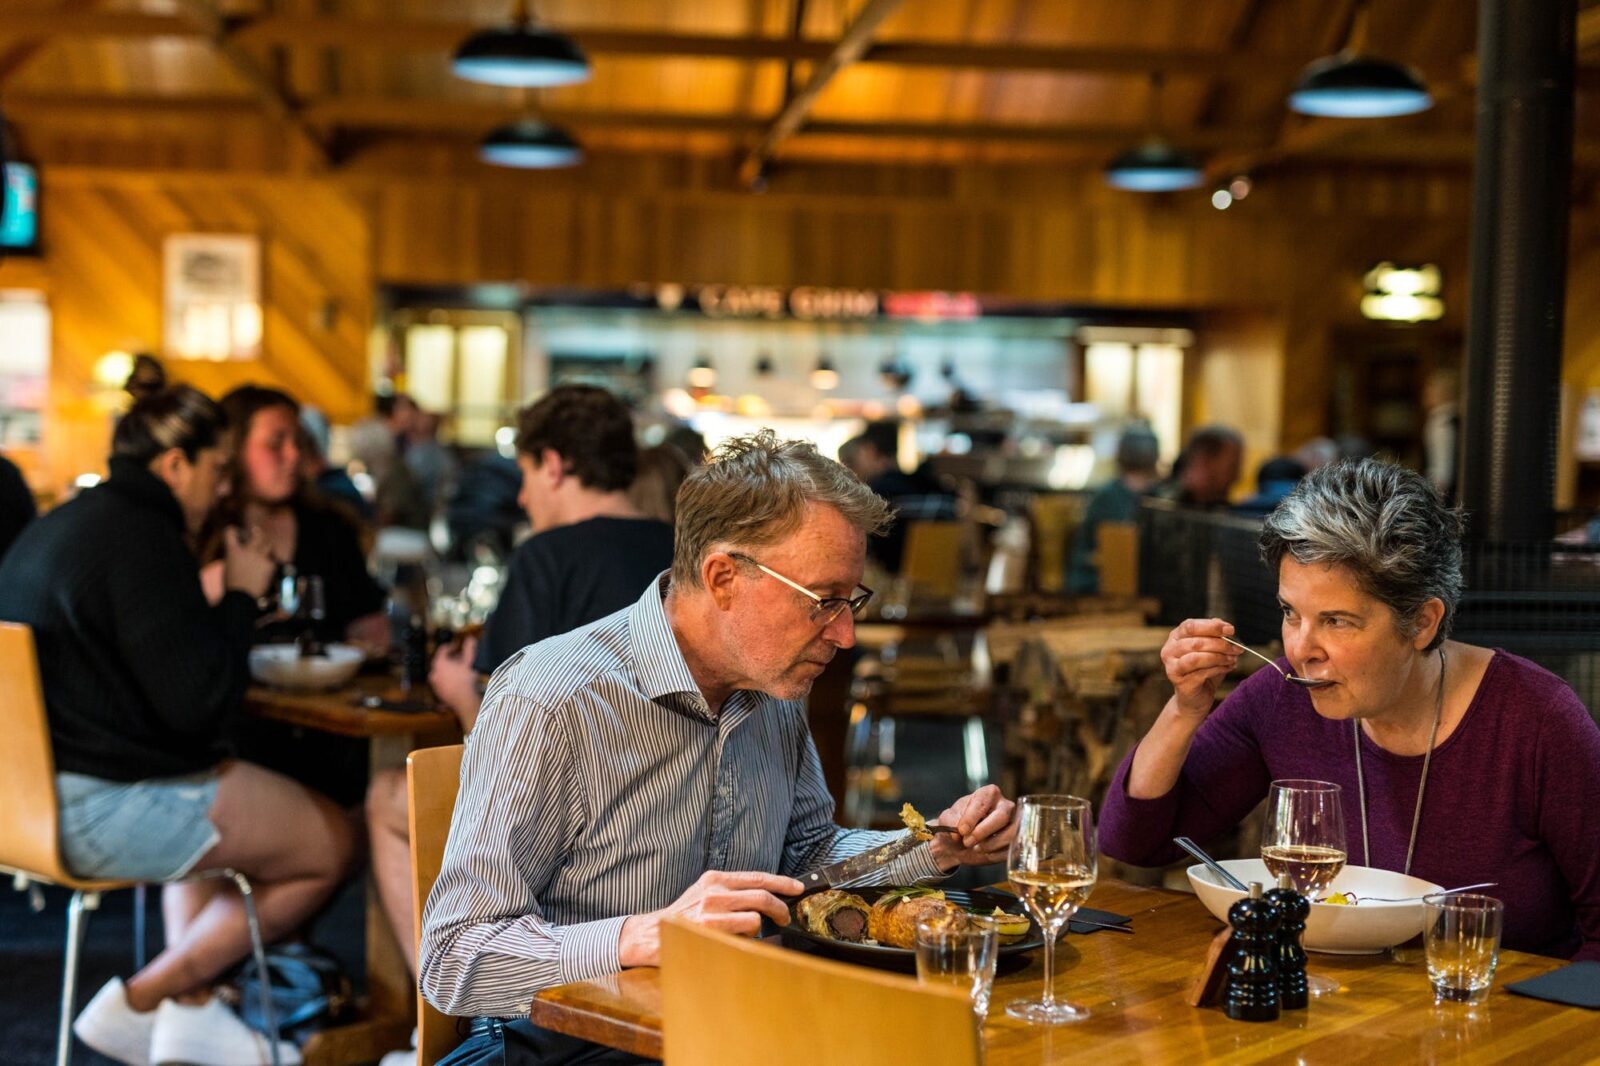 Couple eating a meal in Kauri Bistro with other patrons & Cape Grim Grill visible in background